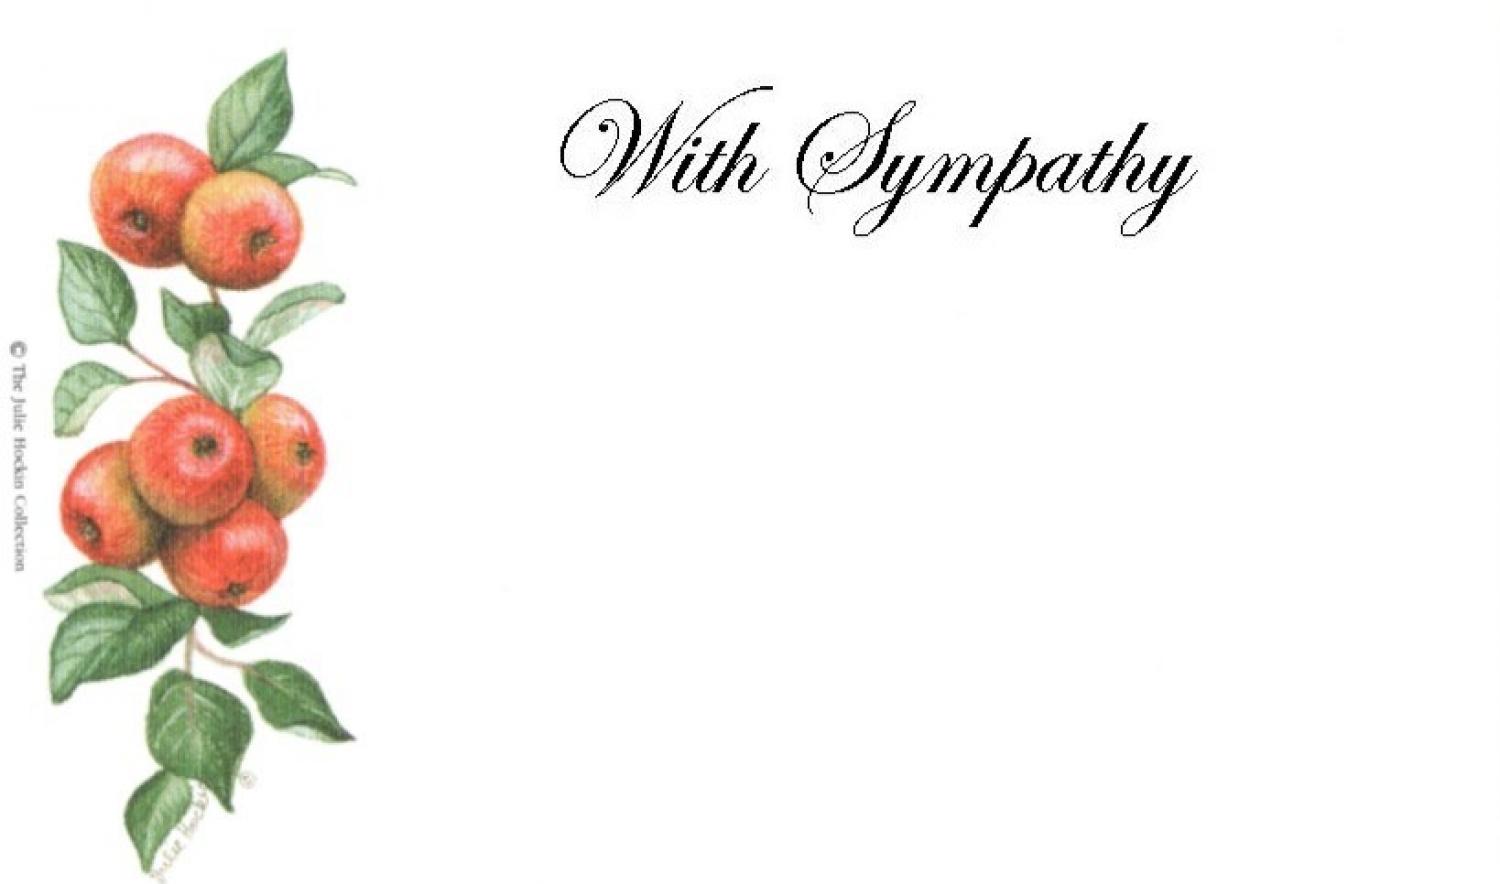 With Sympathy Card - Apples